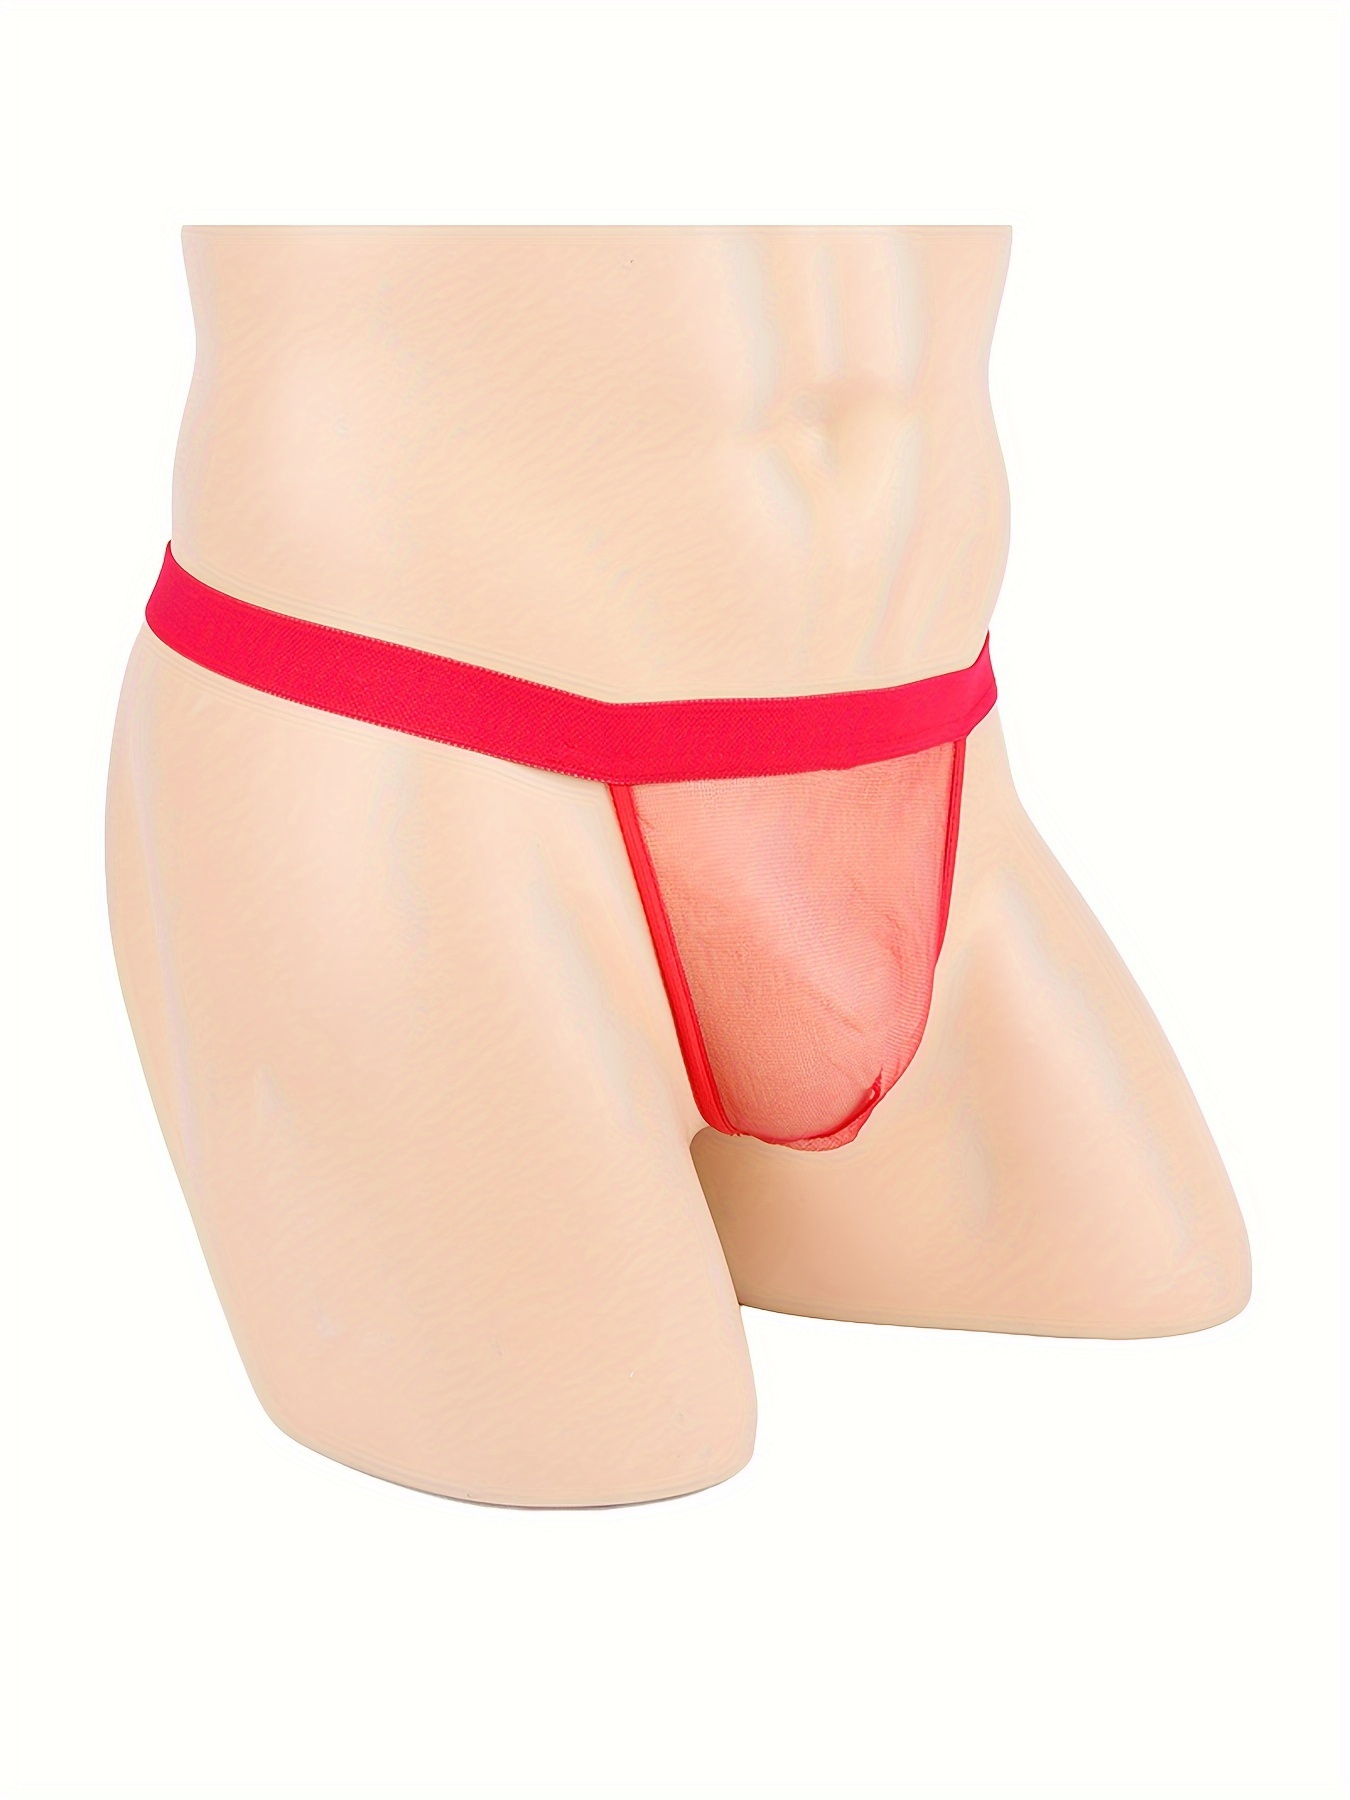 Buy Cover Male Mens Slip Thong Pouch Enhancing Low Waist Sexy Back